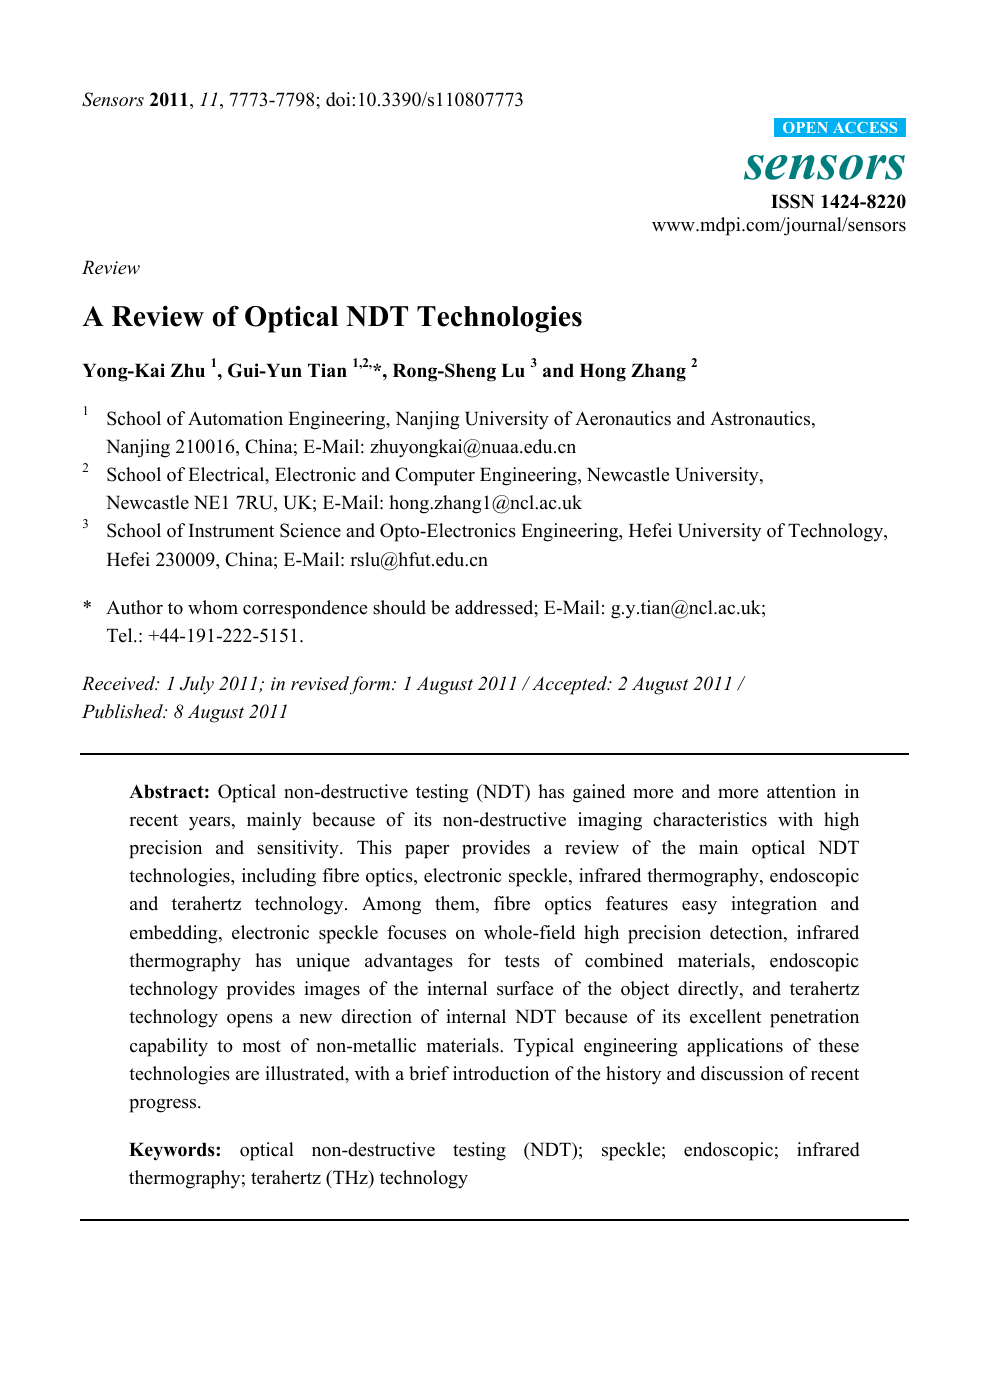 A Review Of Optical Ndt Technologies Topic Of Research Paper In Materials Engineering Download Scholarly Article Pdf And Read For Free On Cyberleninka Open Science Hub